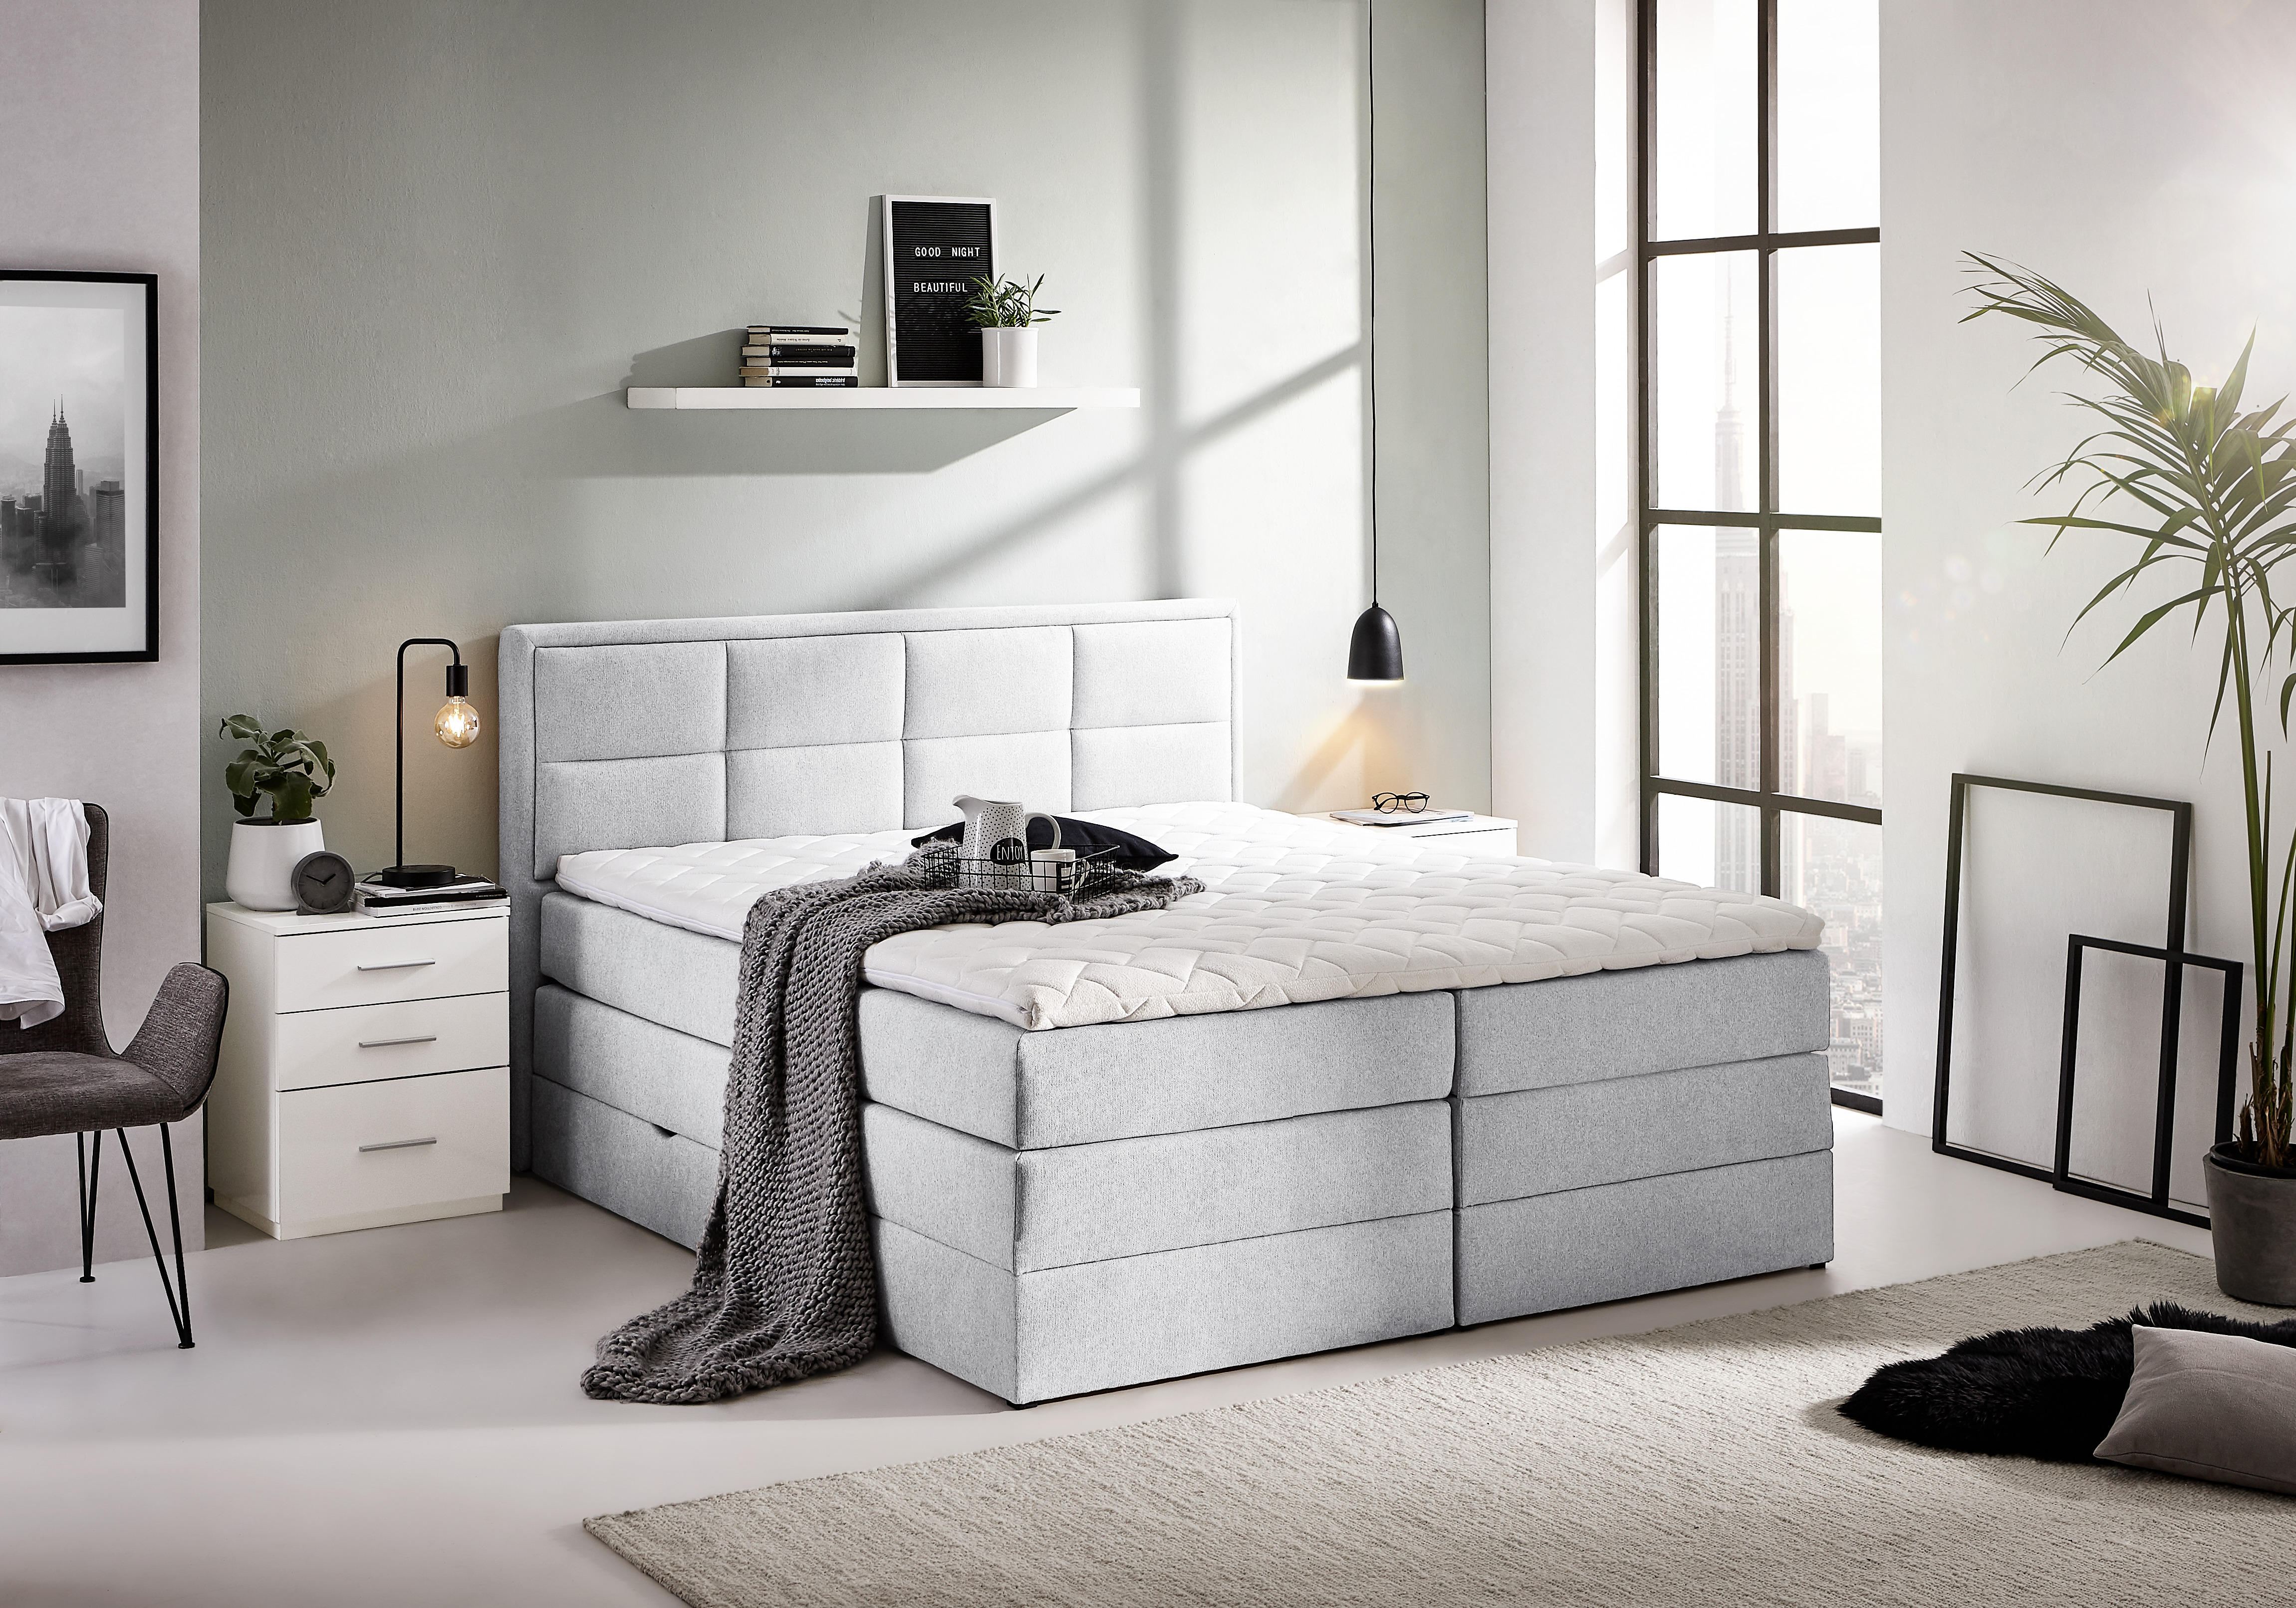 BOXSPRINGBETT 200/200 cm  in Greige  - Greige, KONVENTIONELL, Textil (200/200cm) - Carryhome